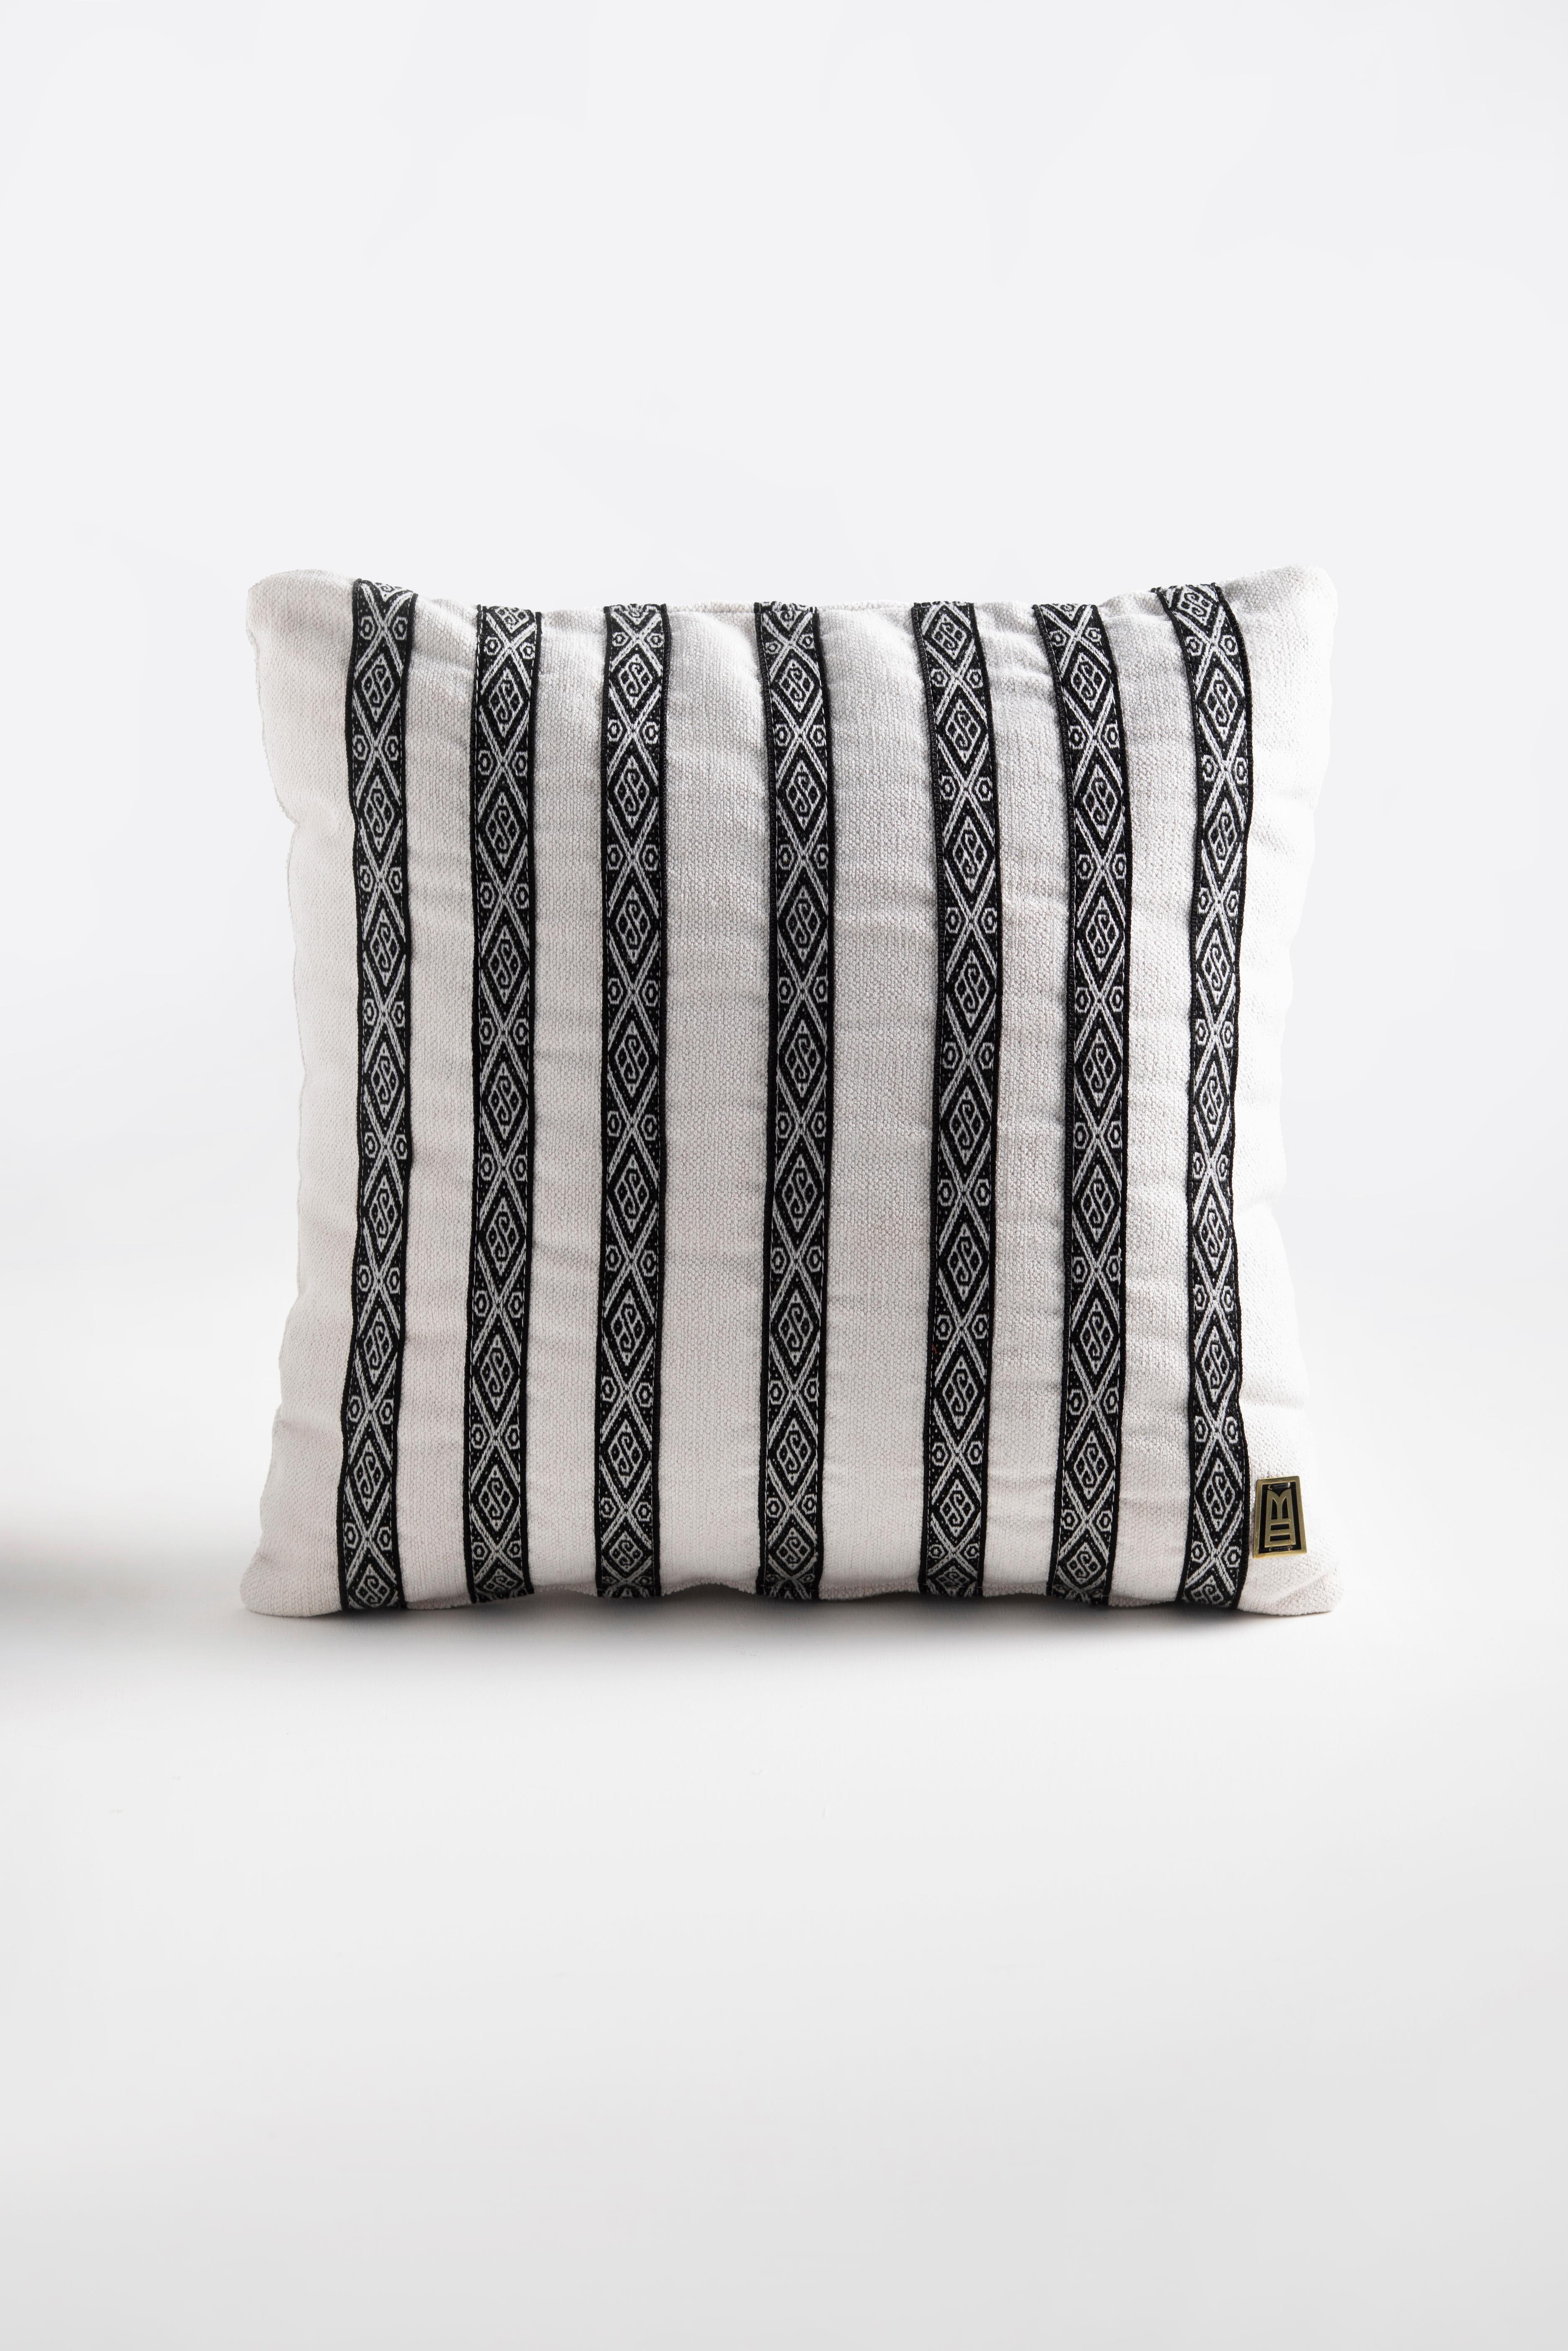 Decorative pillow with handwoven artisanal sash details from Peguche, Imbabura, and waterproof velvet or upholstery fabric.

These decorative cushions are carefully hand-crafted with cotton embroidery and enriched with accents of sheep fur and